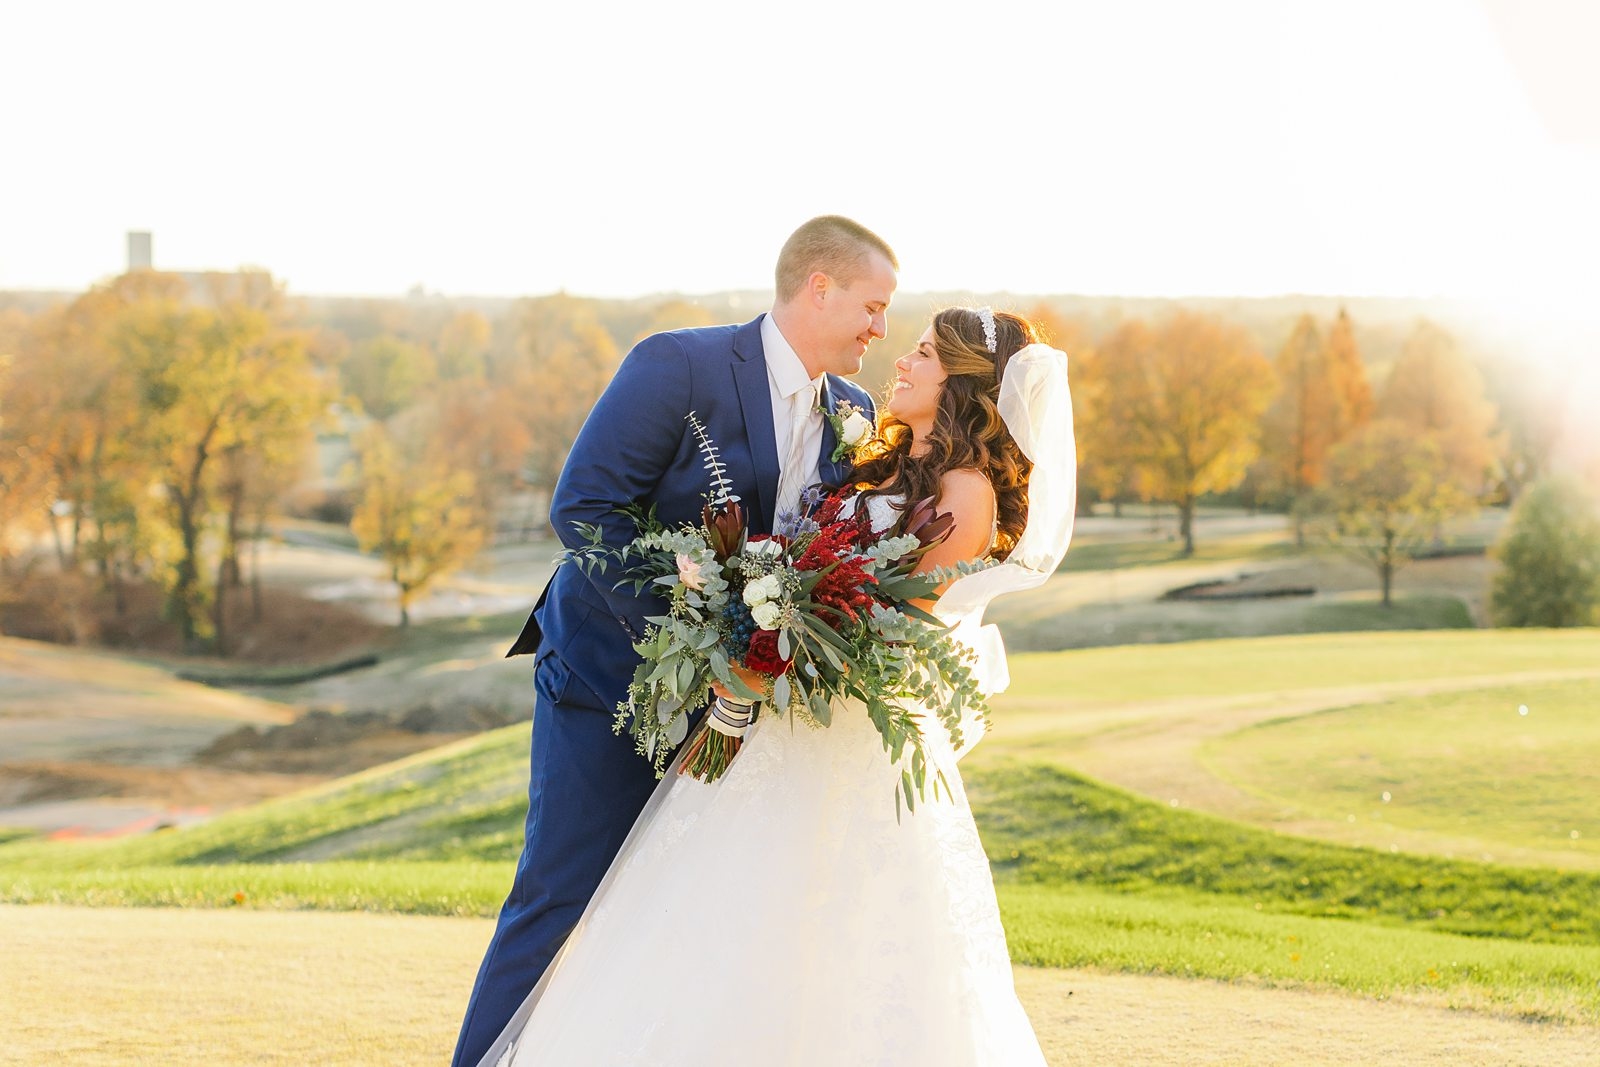 An Evansville Country Club Wedding | Abby and Wes | 132.jpg